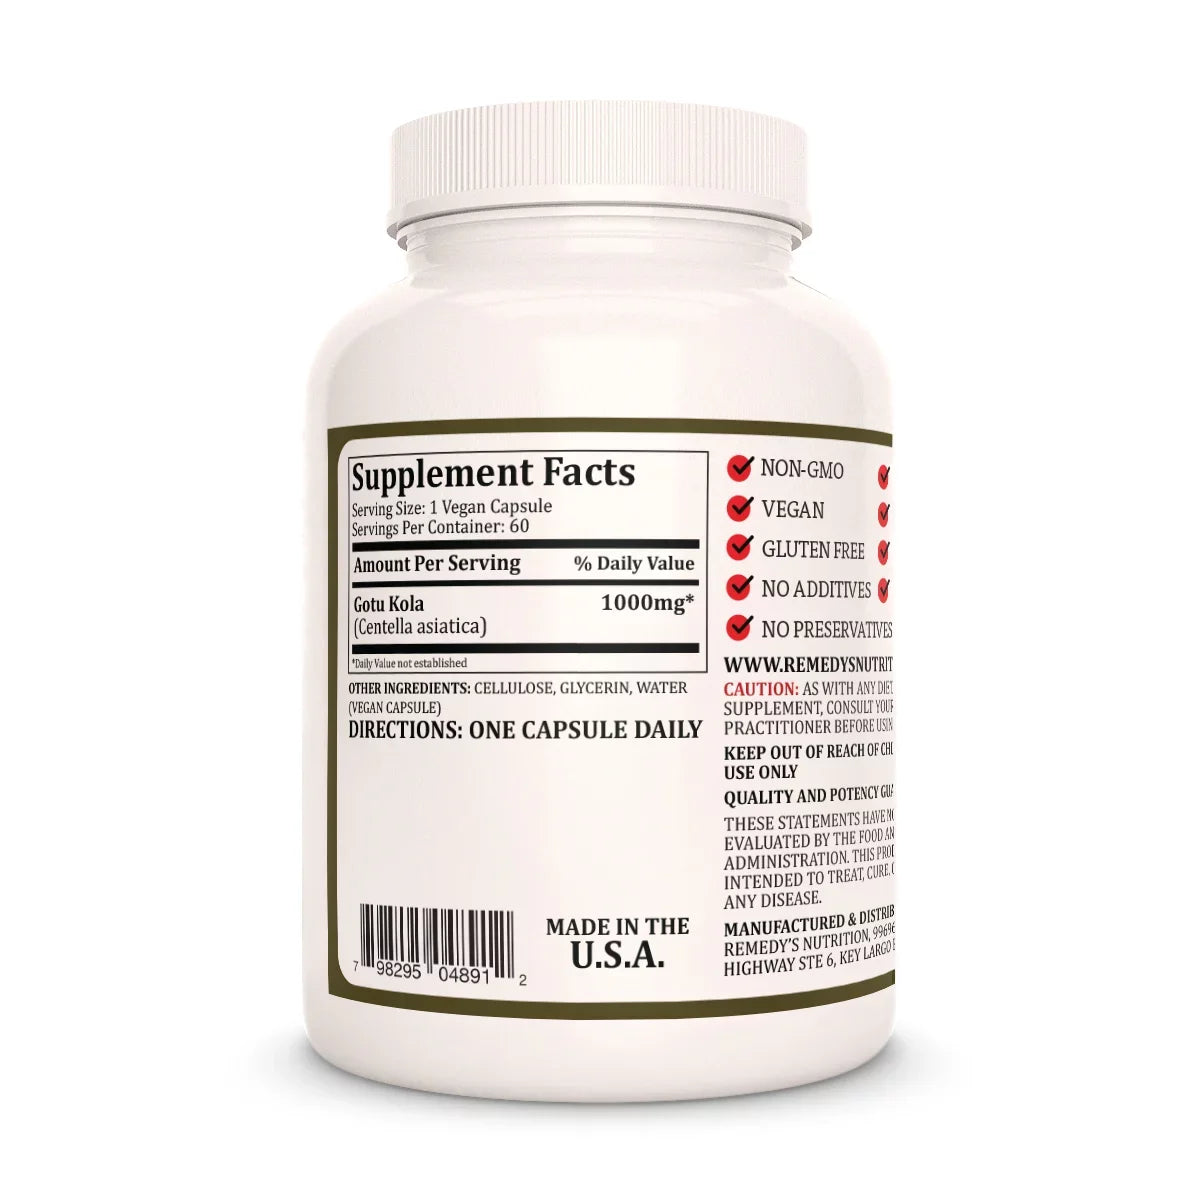 Image of Remedy's Nutrition®  Gotu Kola back label. Supplement Facts, Ingredients and Directions.  Centella asiatica